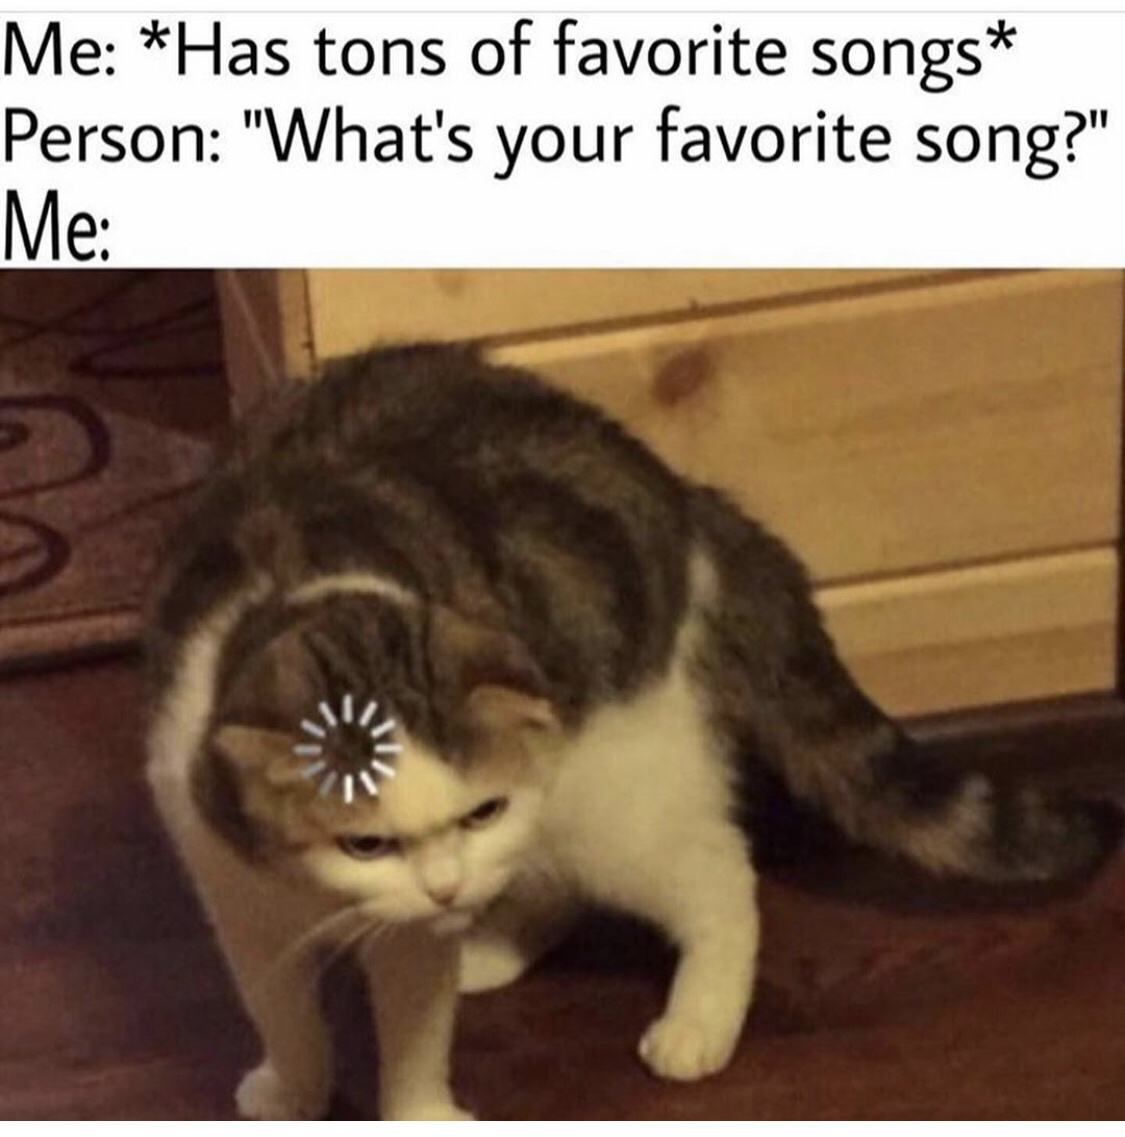 cat thinking meme loading - Me Has tons of favorite songs Person "What's your favorite song?" Me